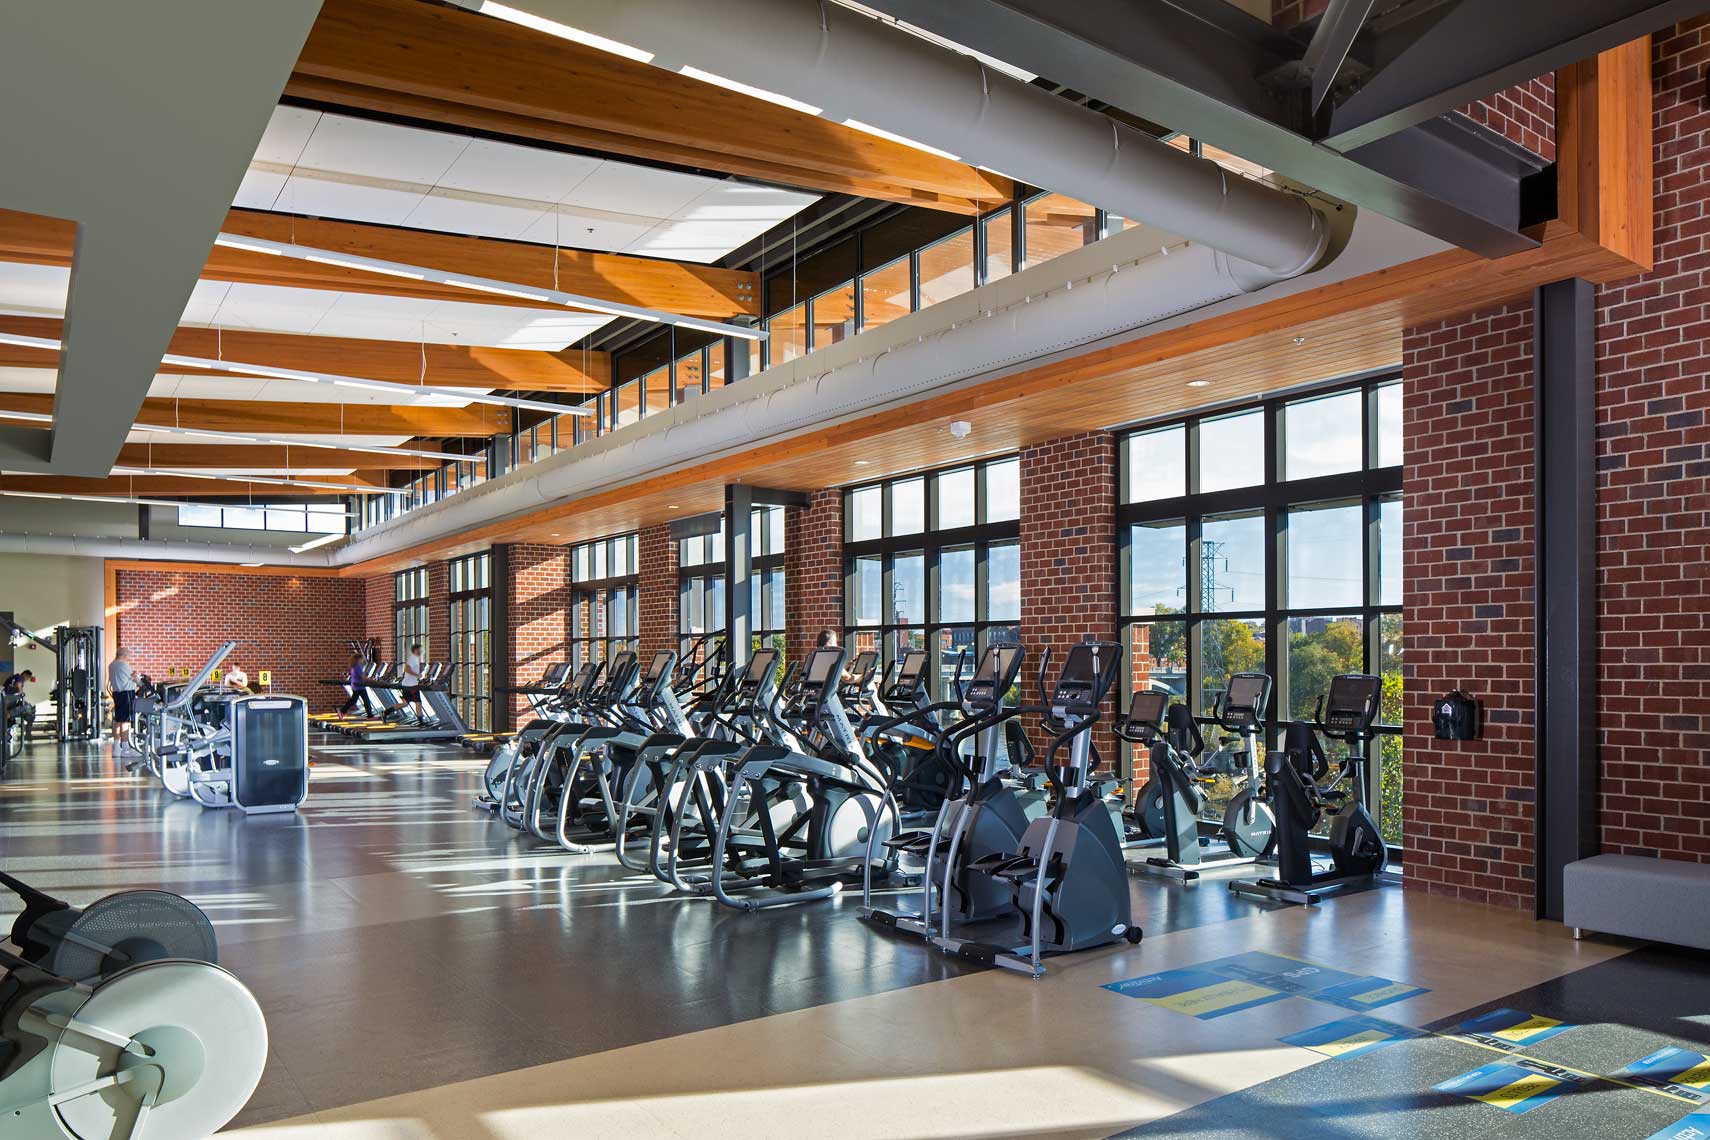 The cardio fitness center at the Danville Family YMCA